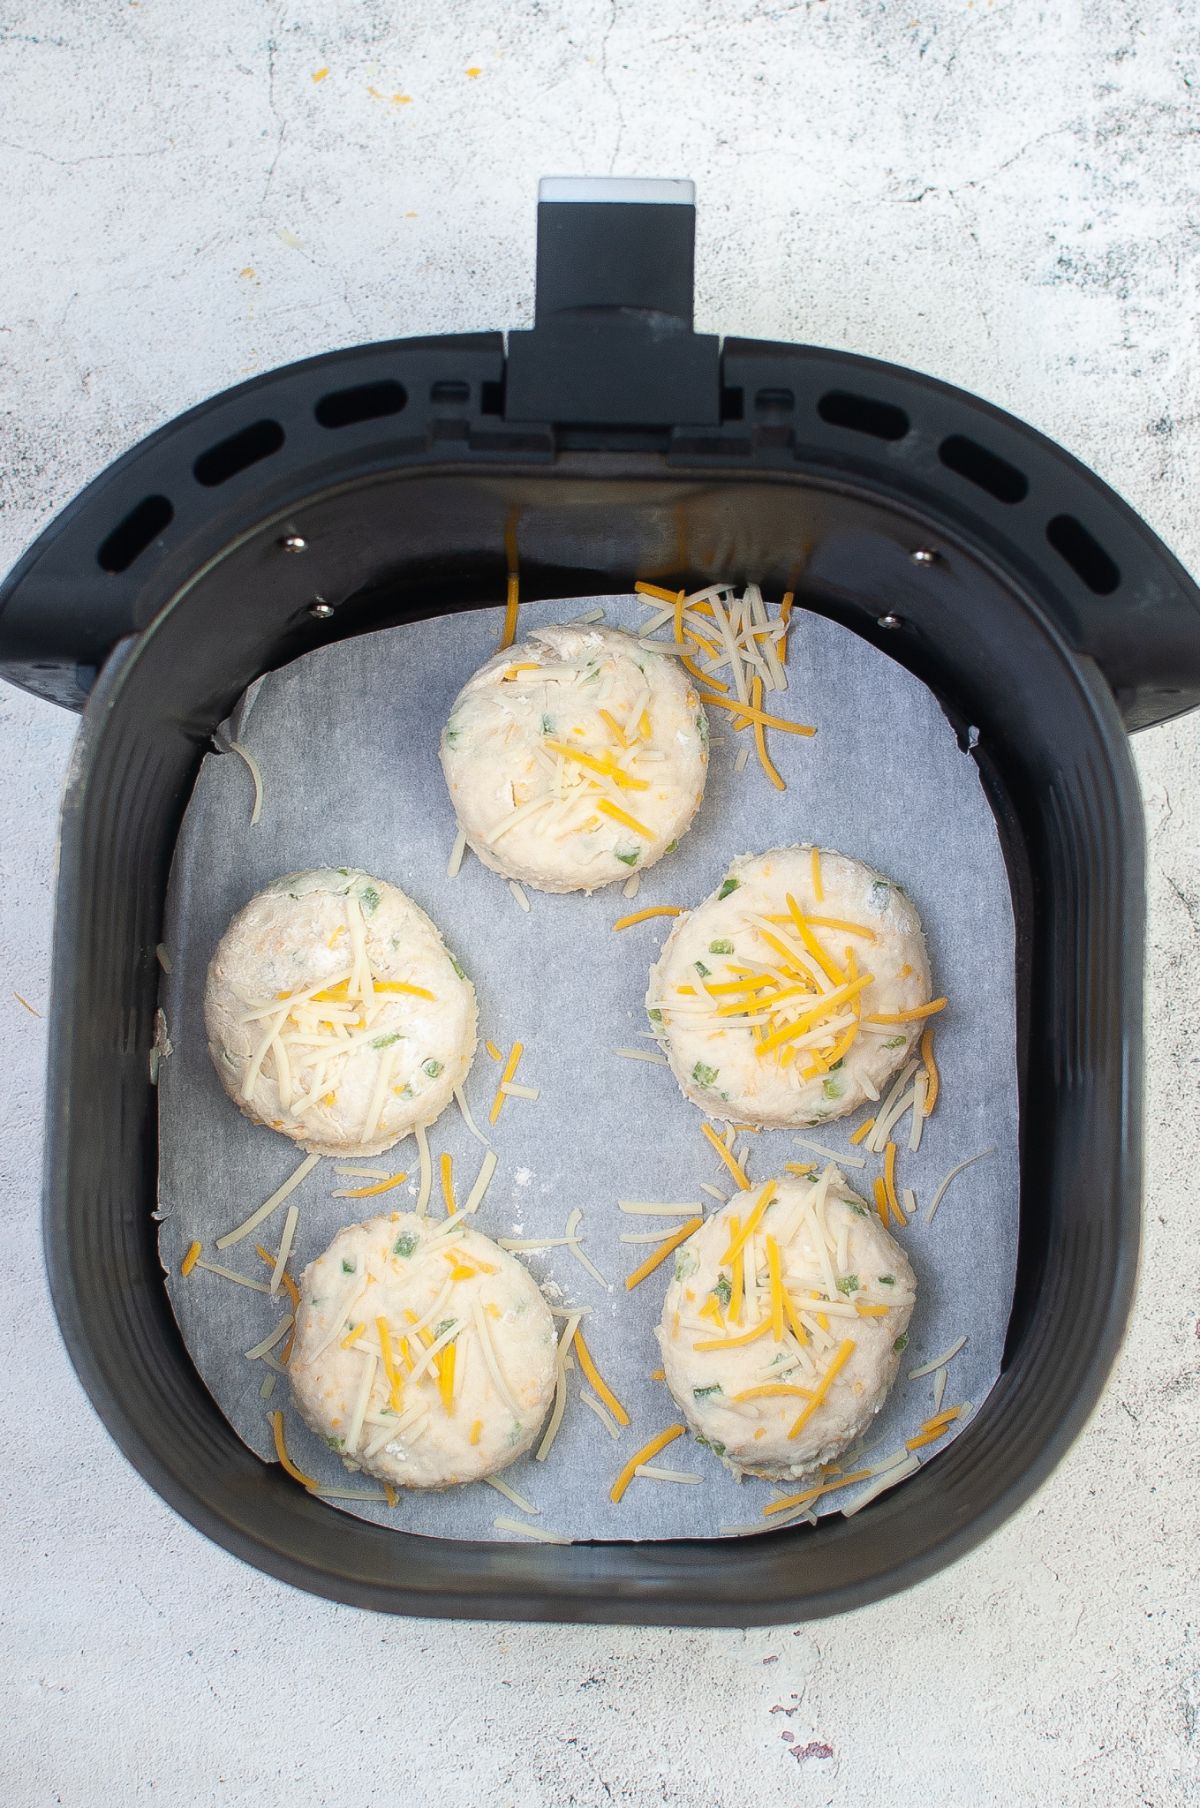 Biscuits dough in the Air Fryer.